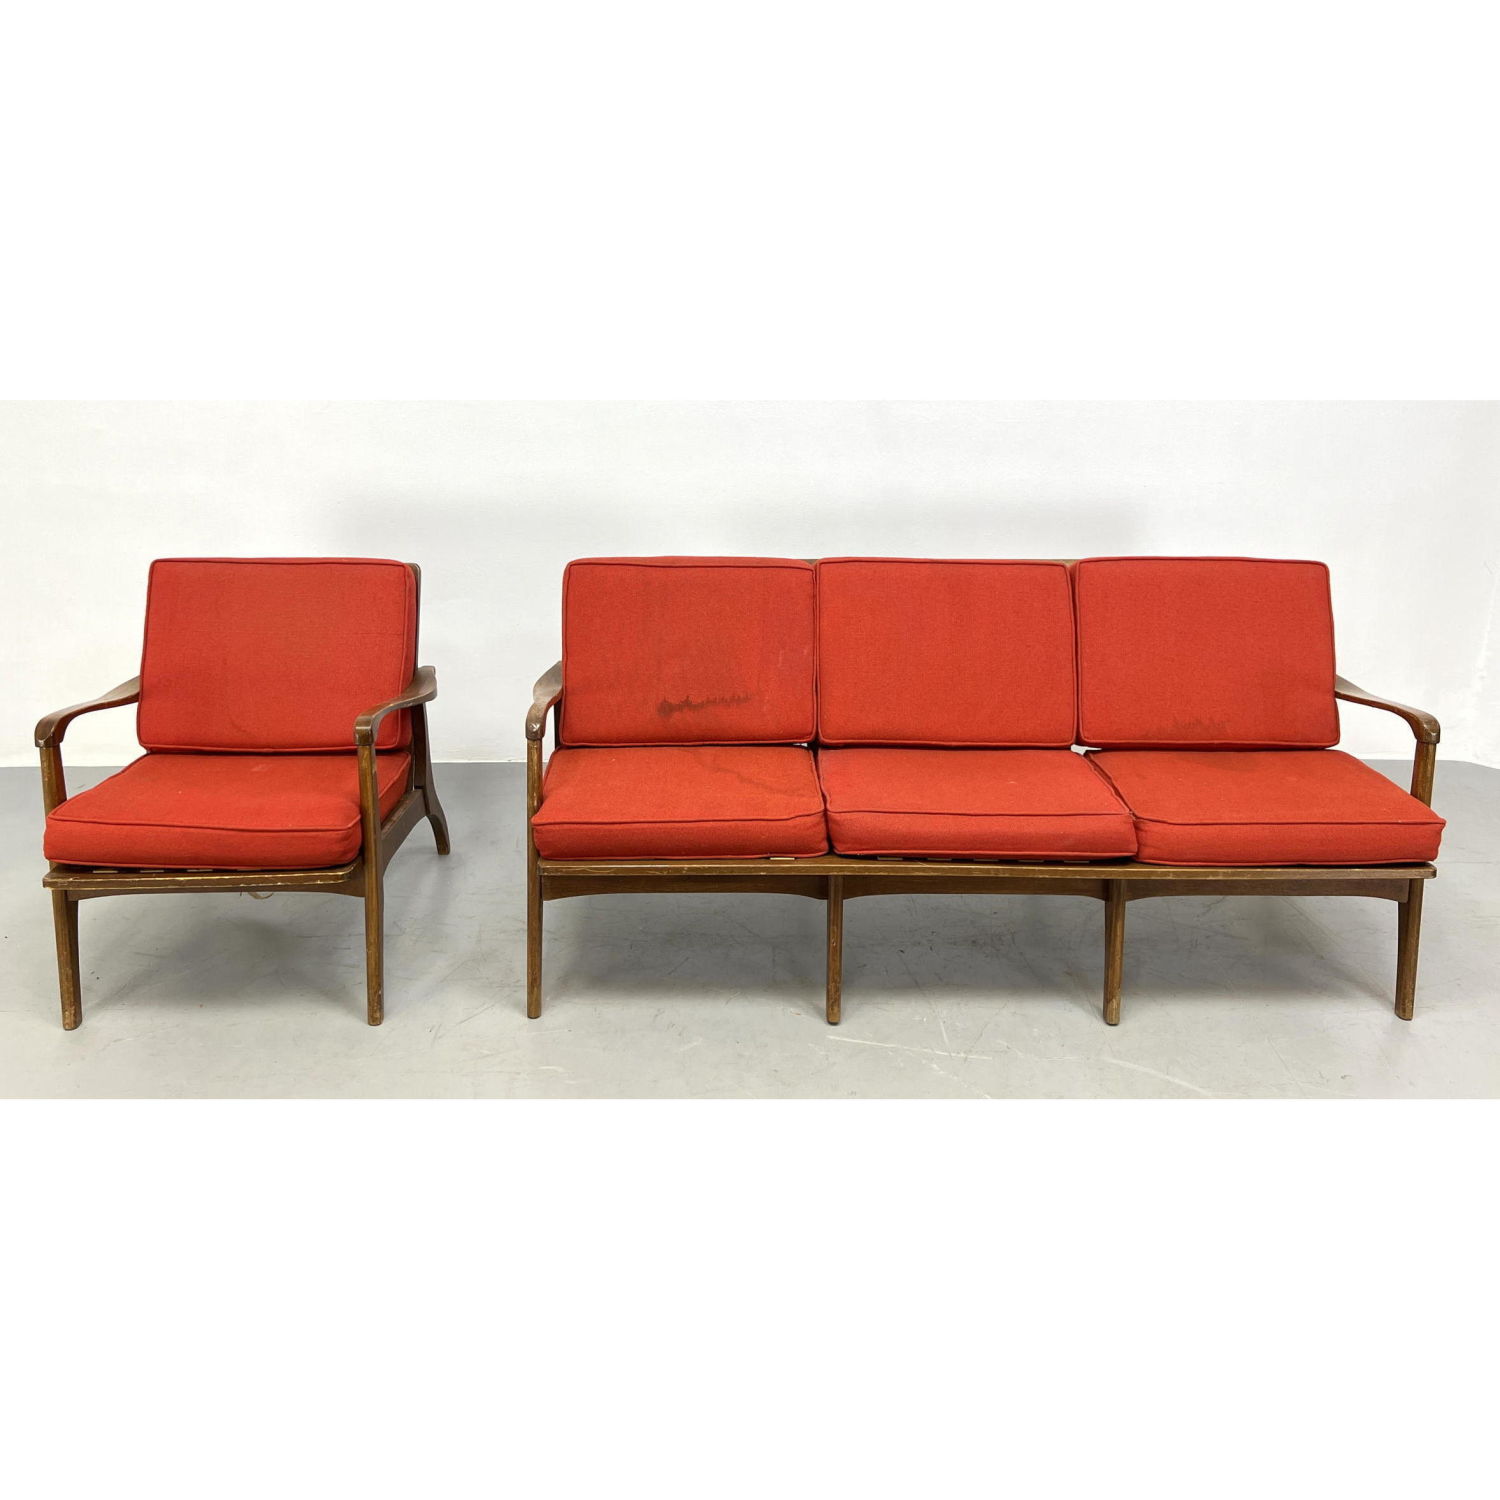 2pc Modernist Sofa and Lounge Chair.